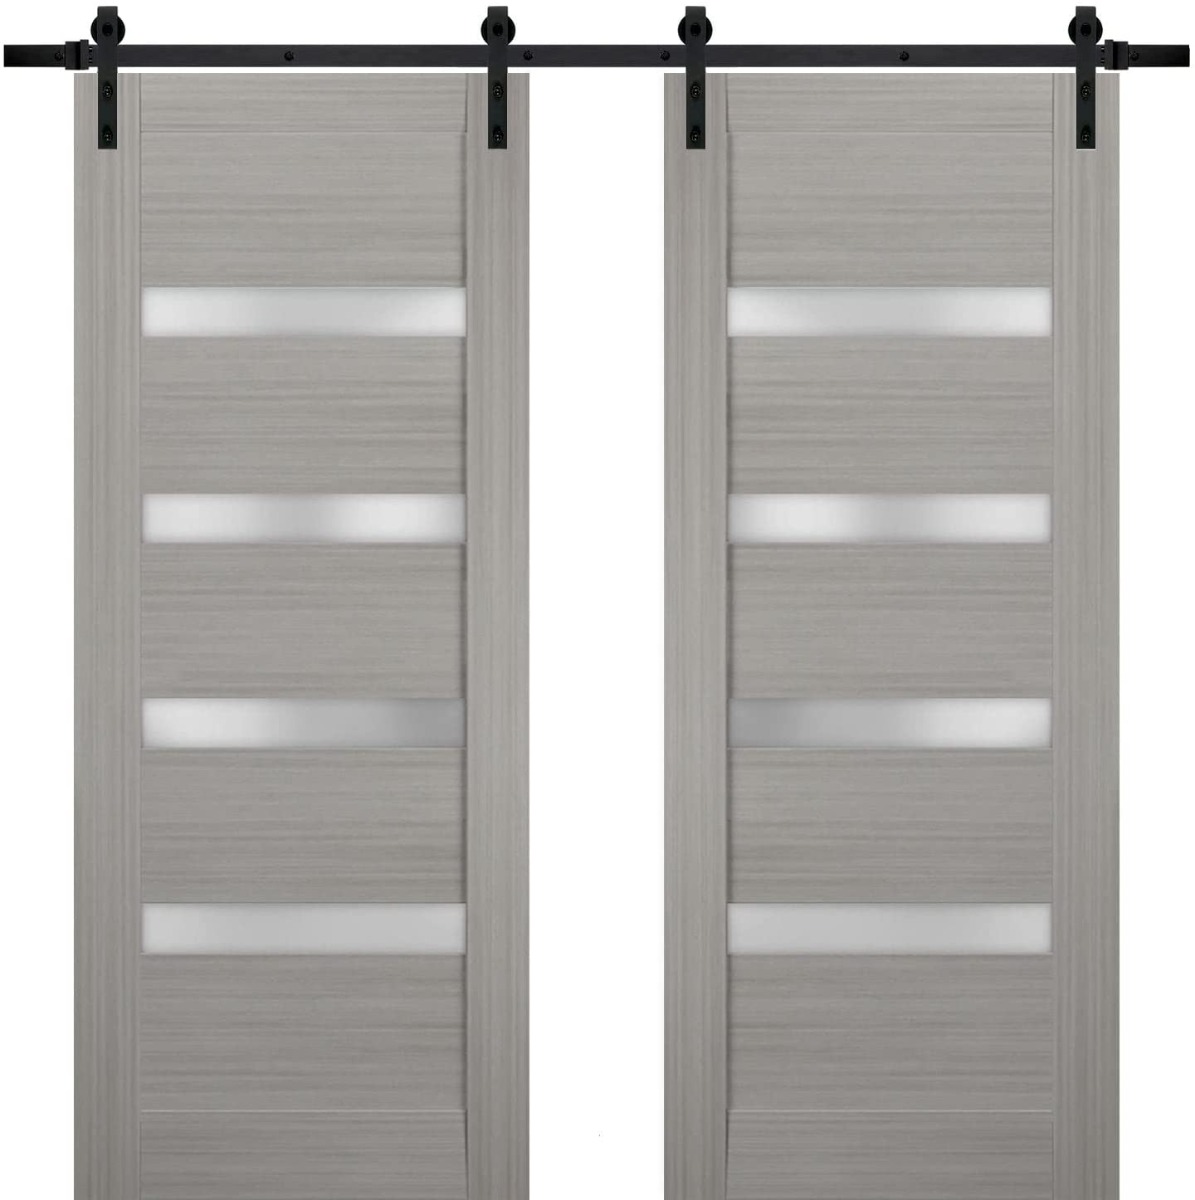 Sturdy Double Barn Door with | Quadro 4113 Grey Ash with Frosted Glass | Black 13FT Rail Hangers Heavy Set | Solid Panel Interior Doors-56